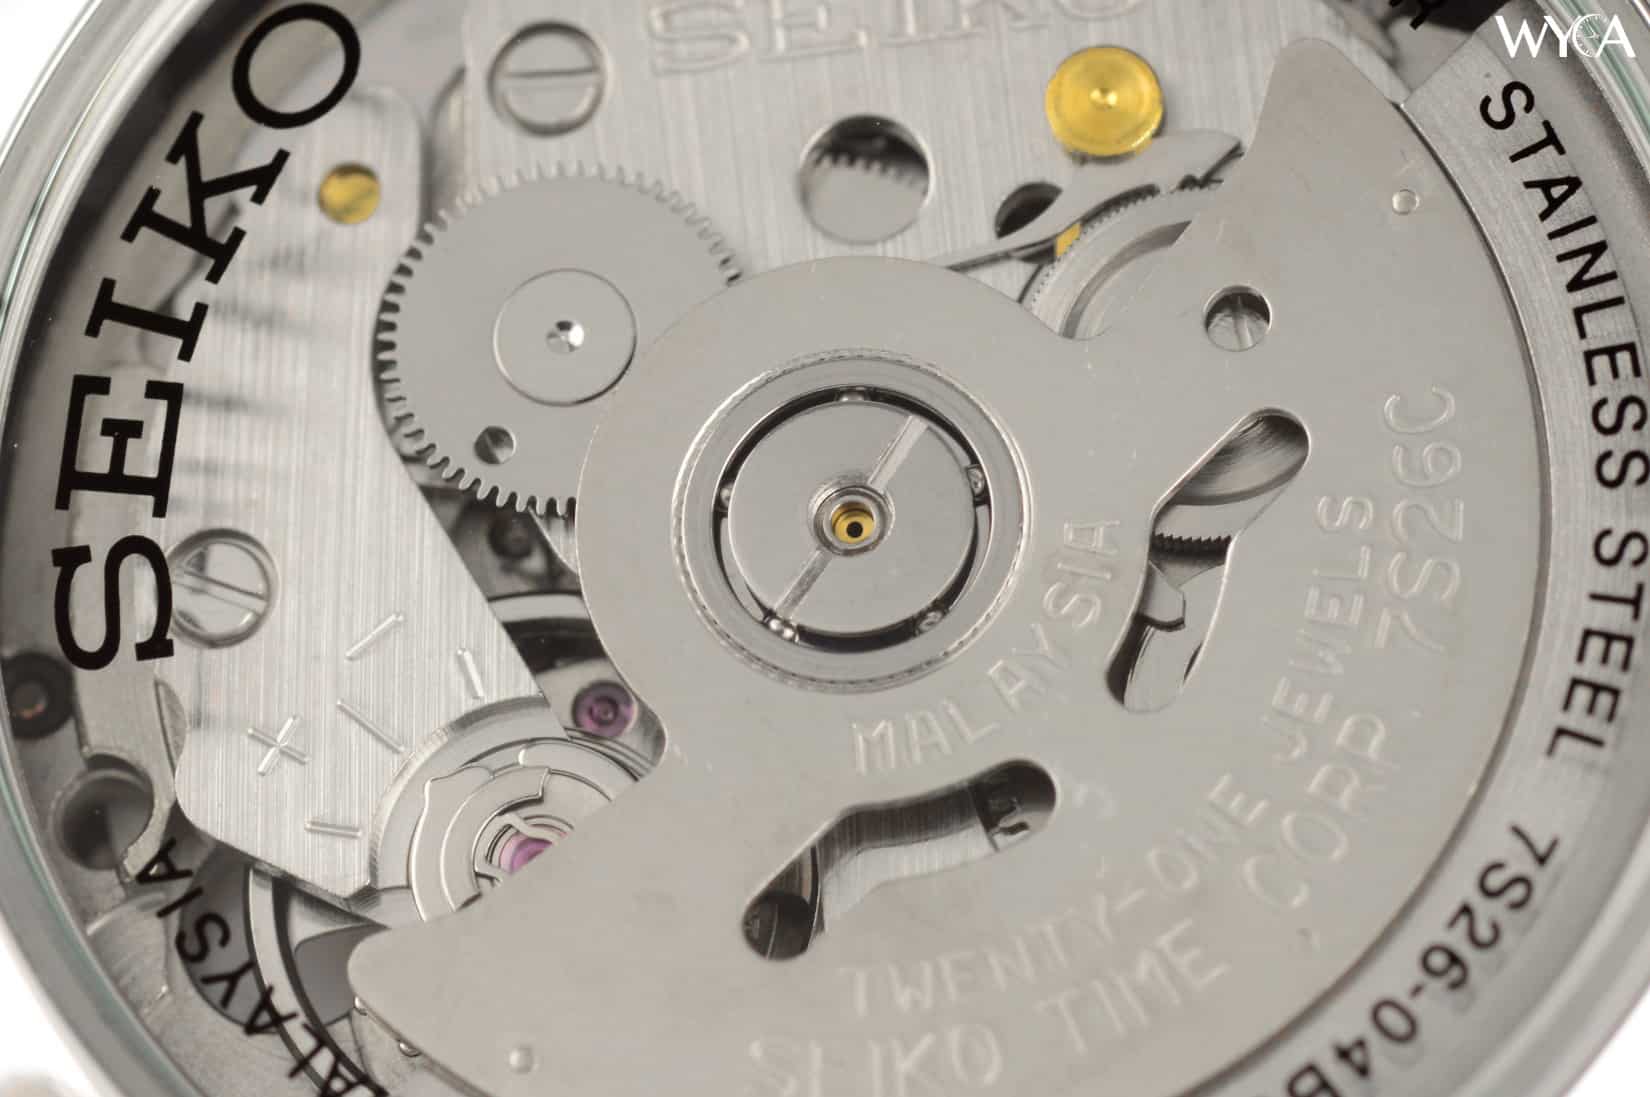 7S26 automatic movement inside SNKM97 – Rotor